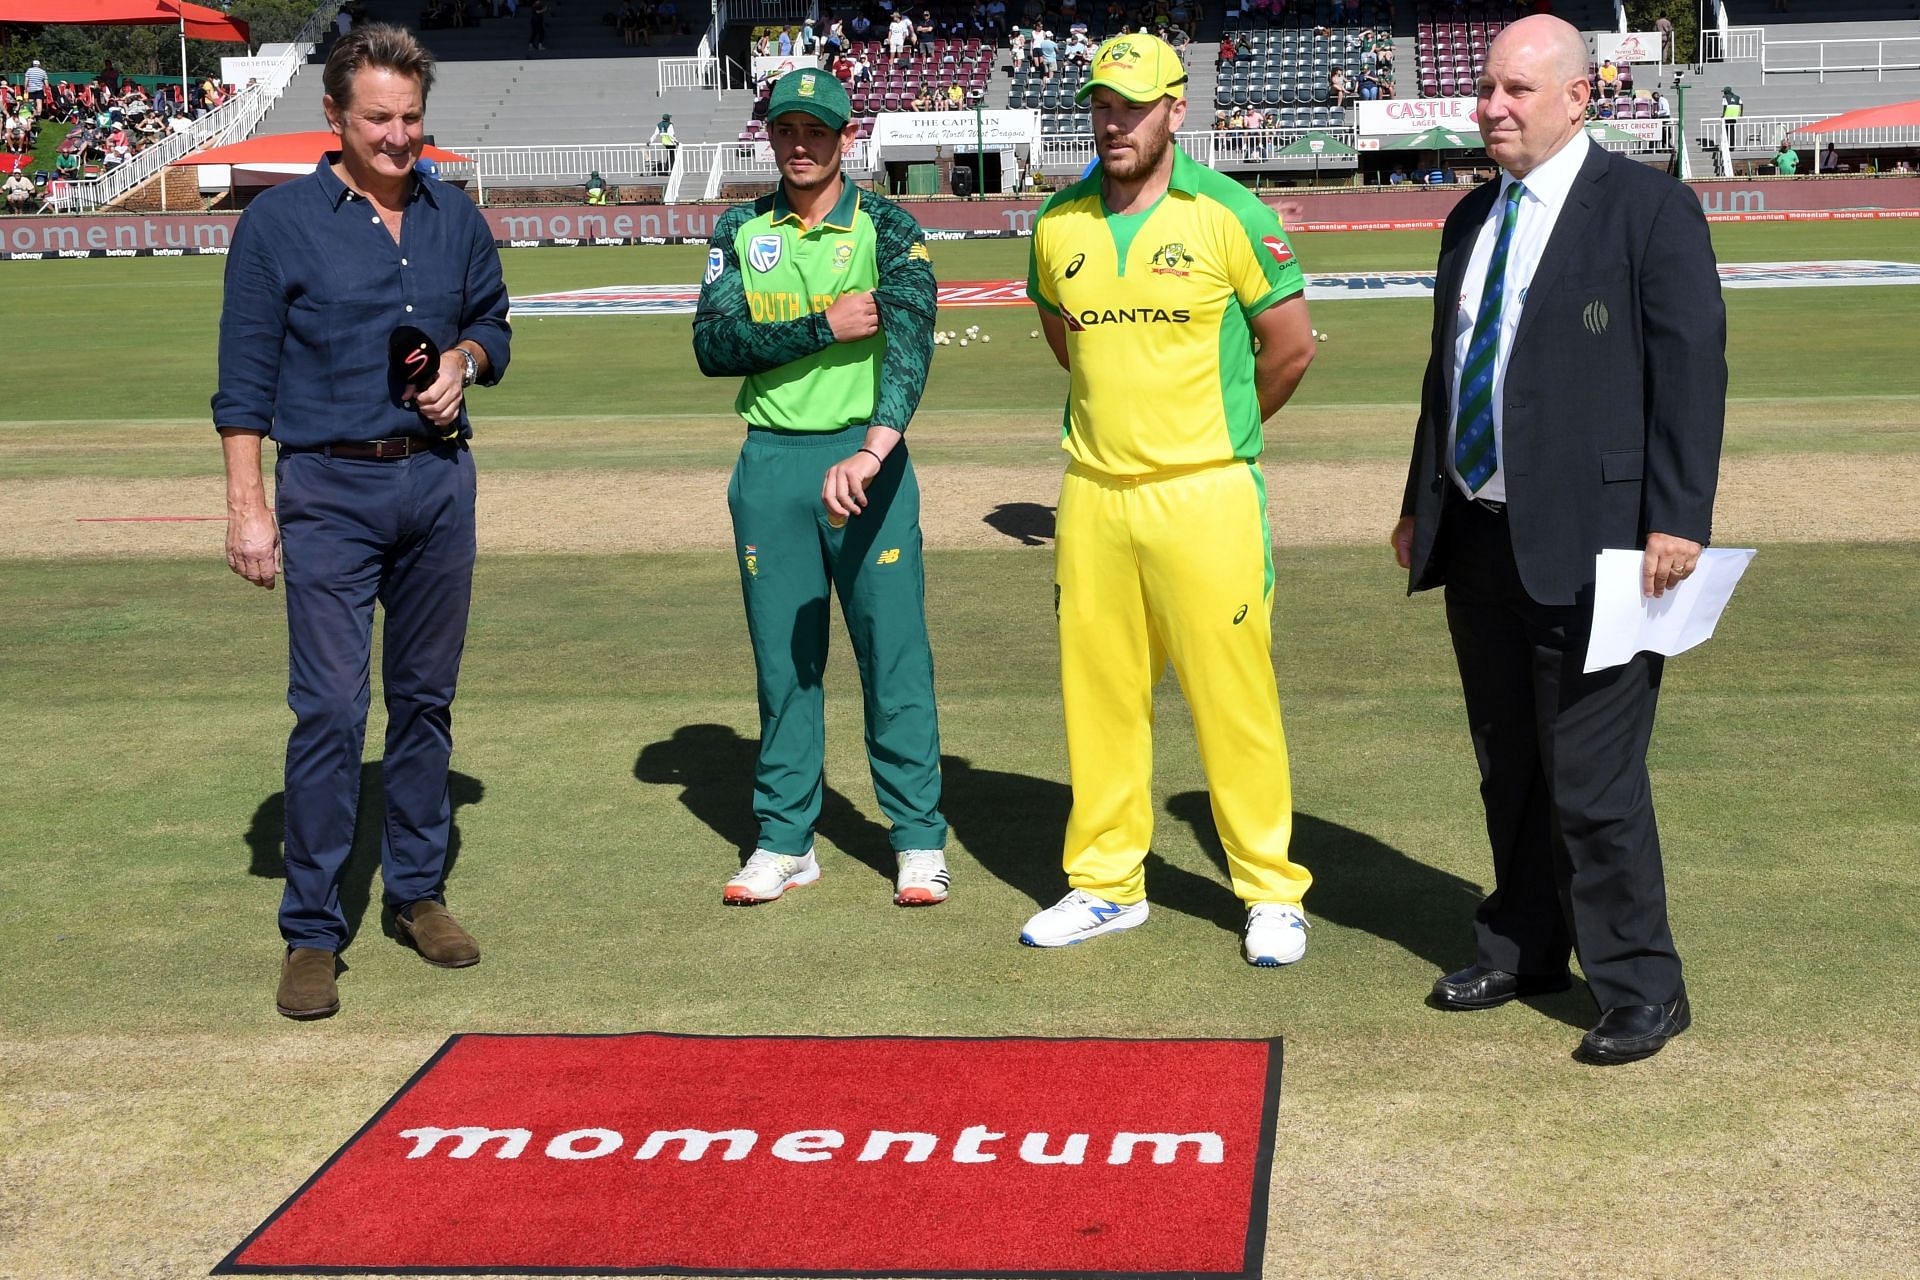 South Africa and Australia were scheduled to compete in a three-match ODI series in January 2023